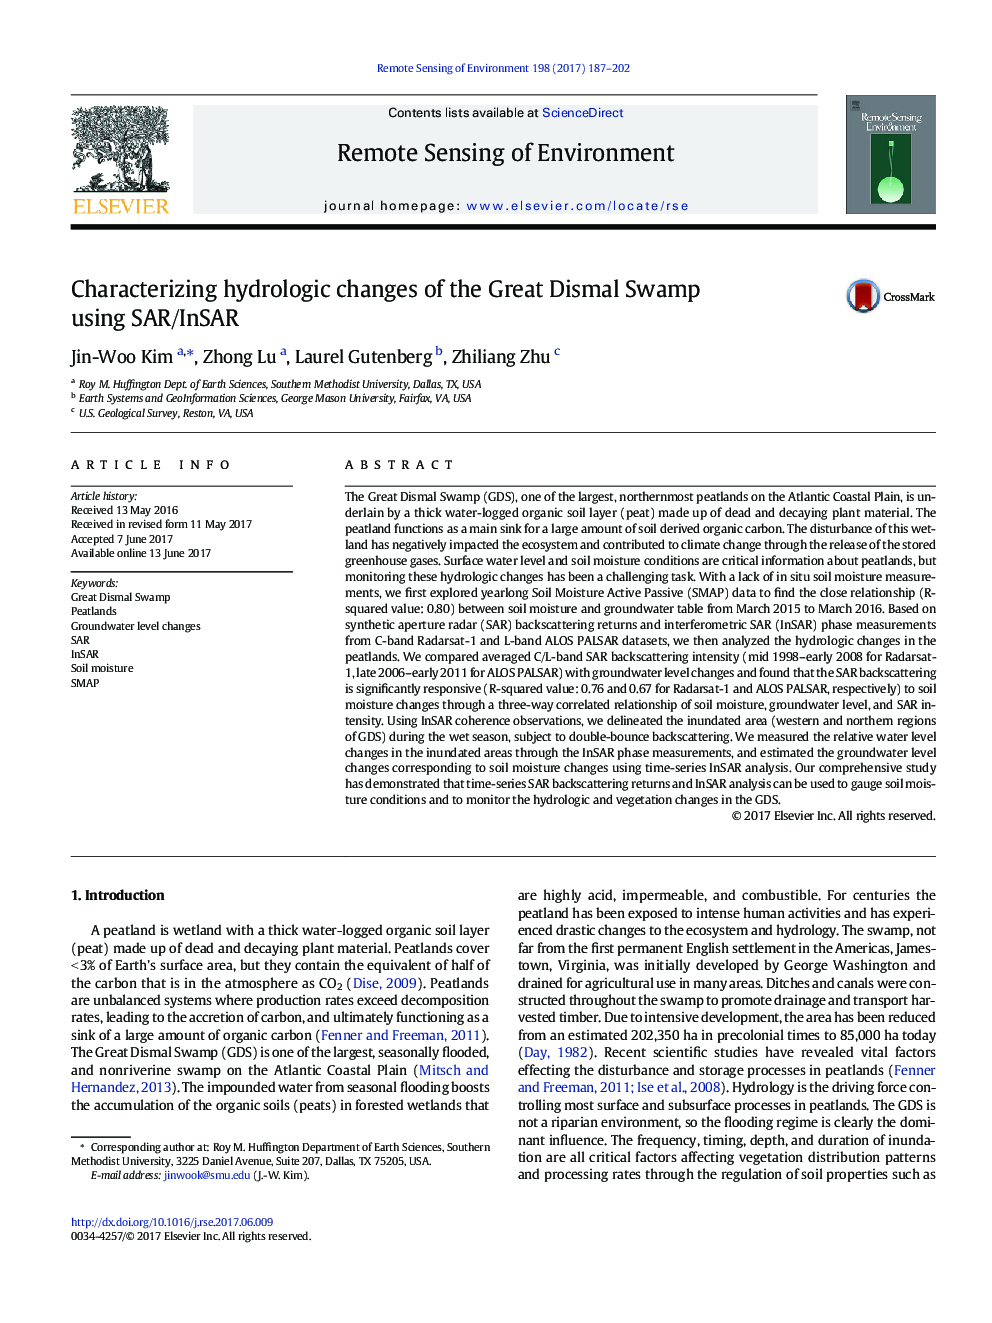 Characterizing hydrologic changes of the Great Dismal Swamp using SAR/InSAR